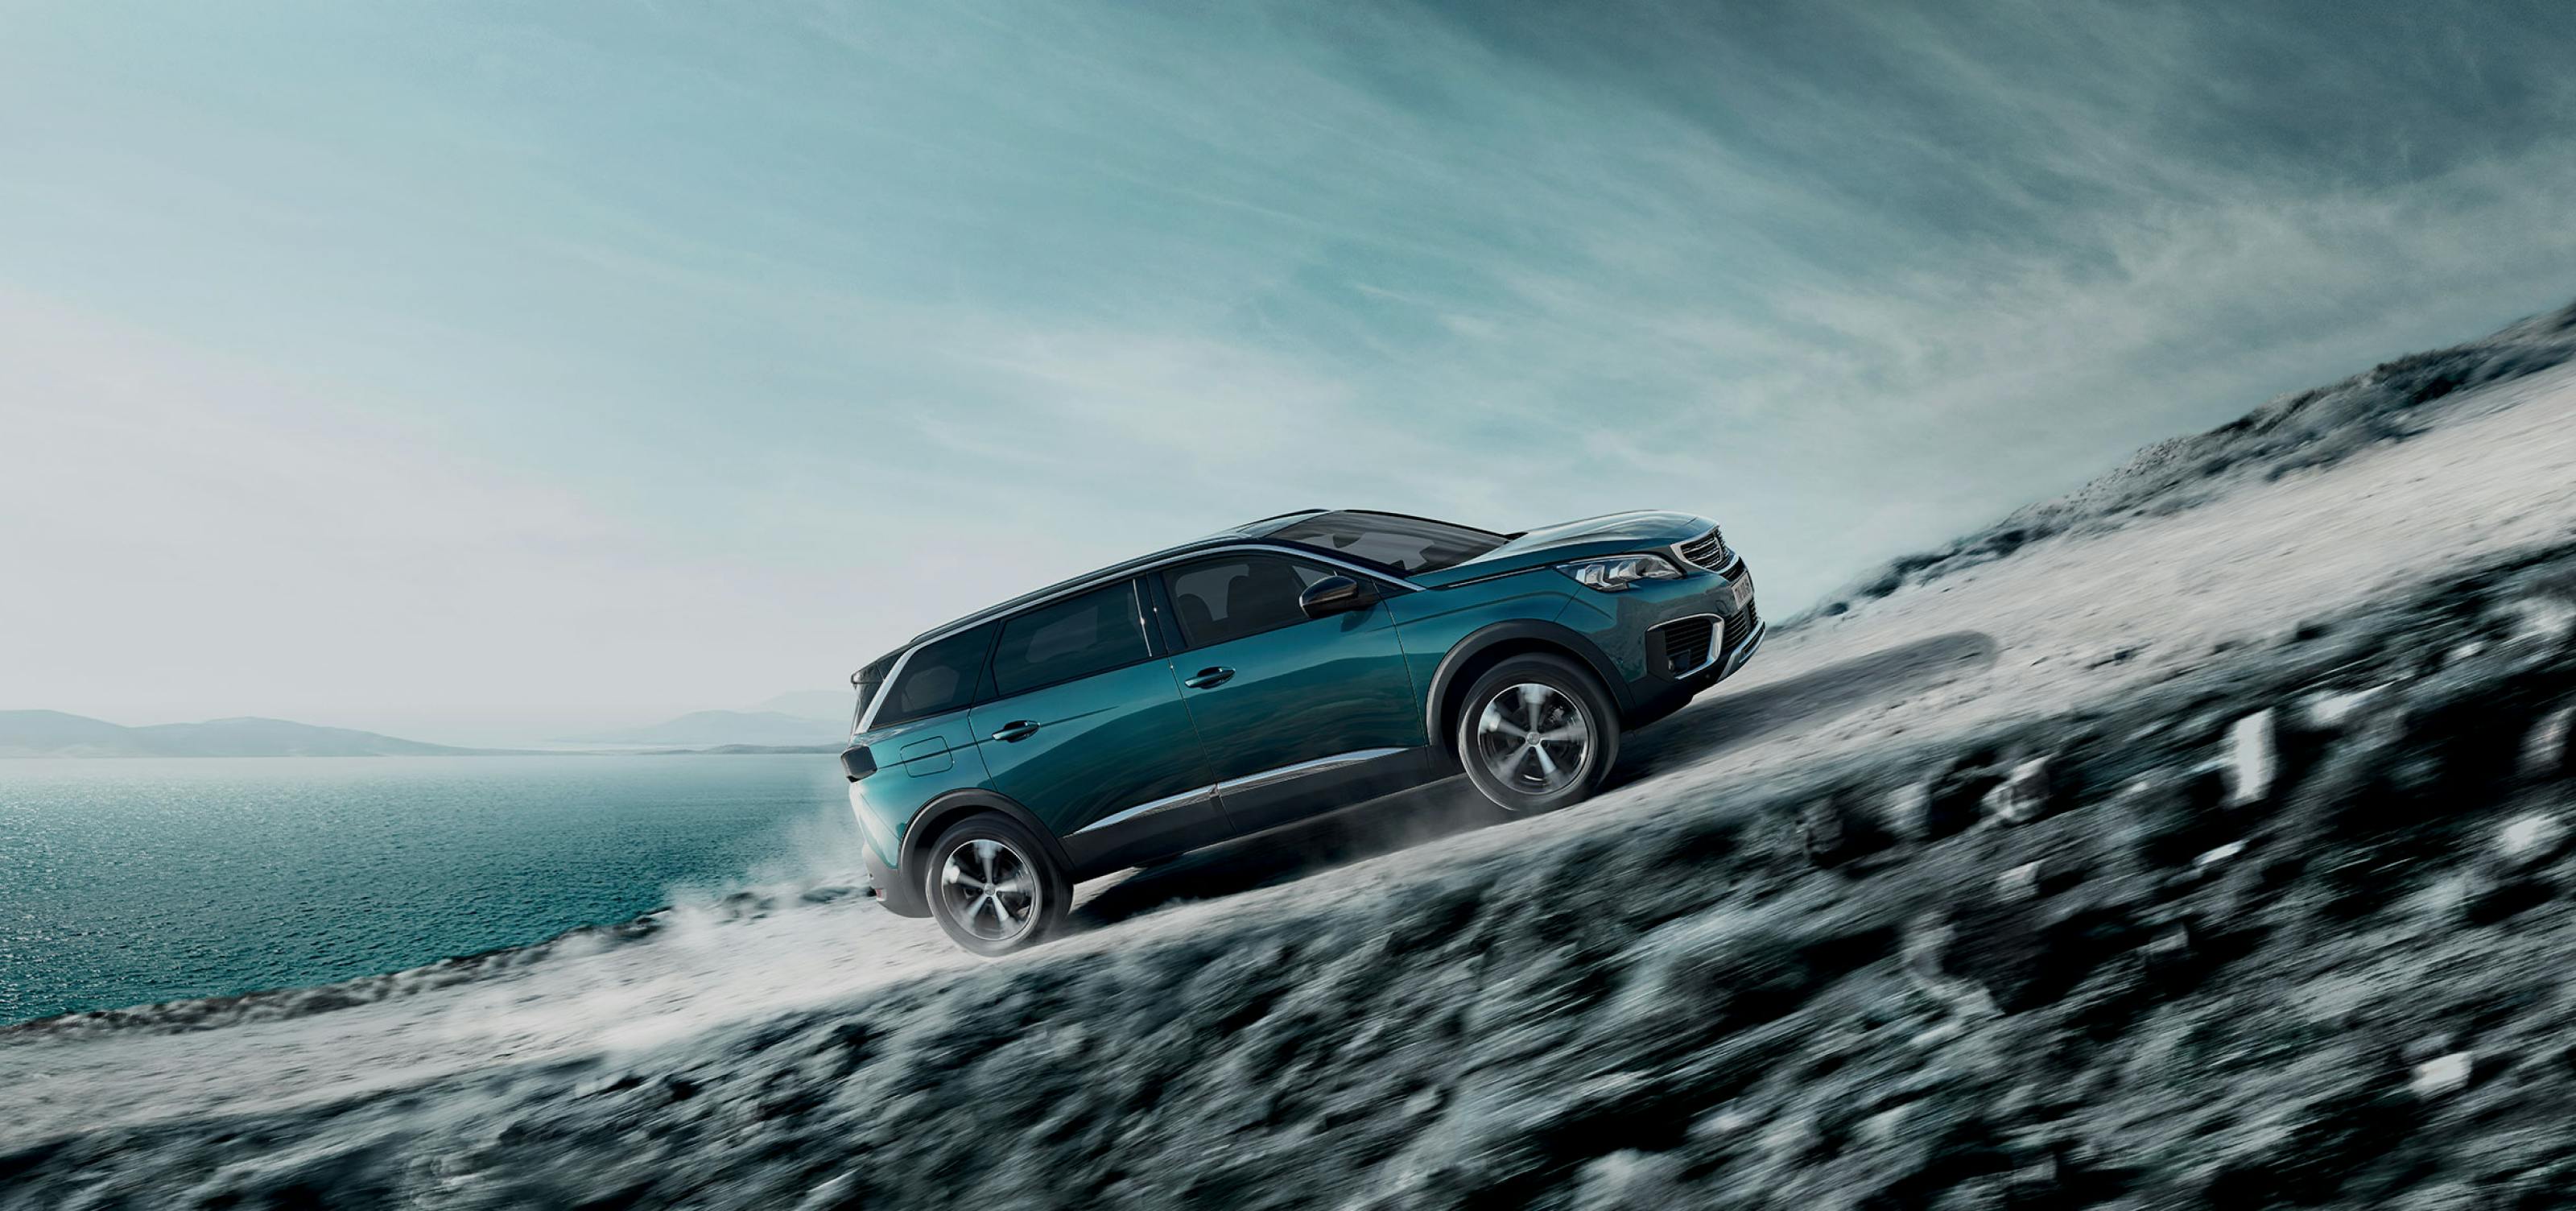 Blue peugeot 3008 driving on a steep slope